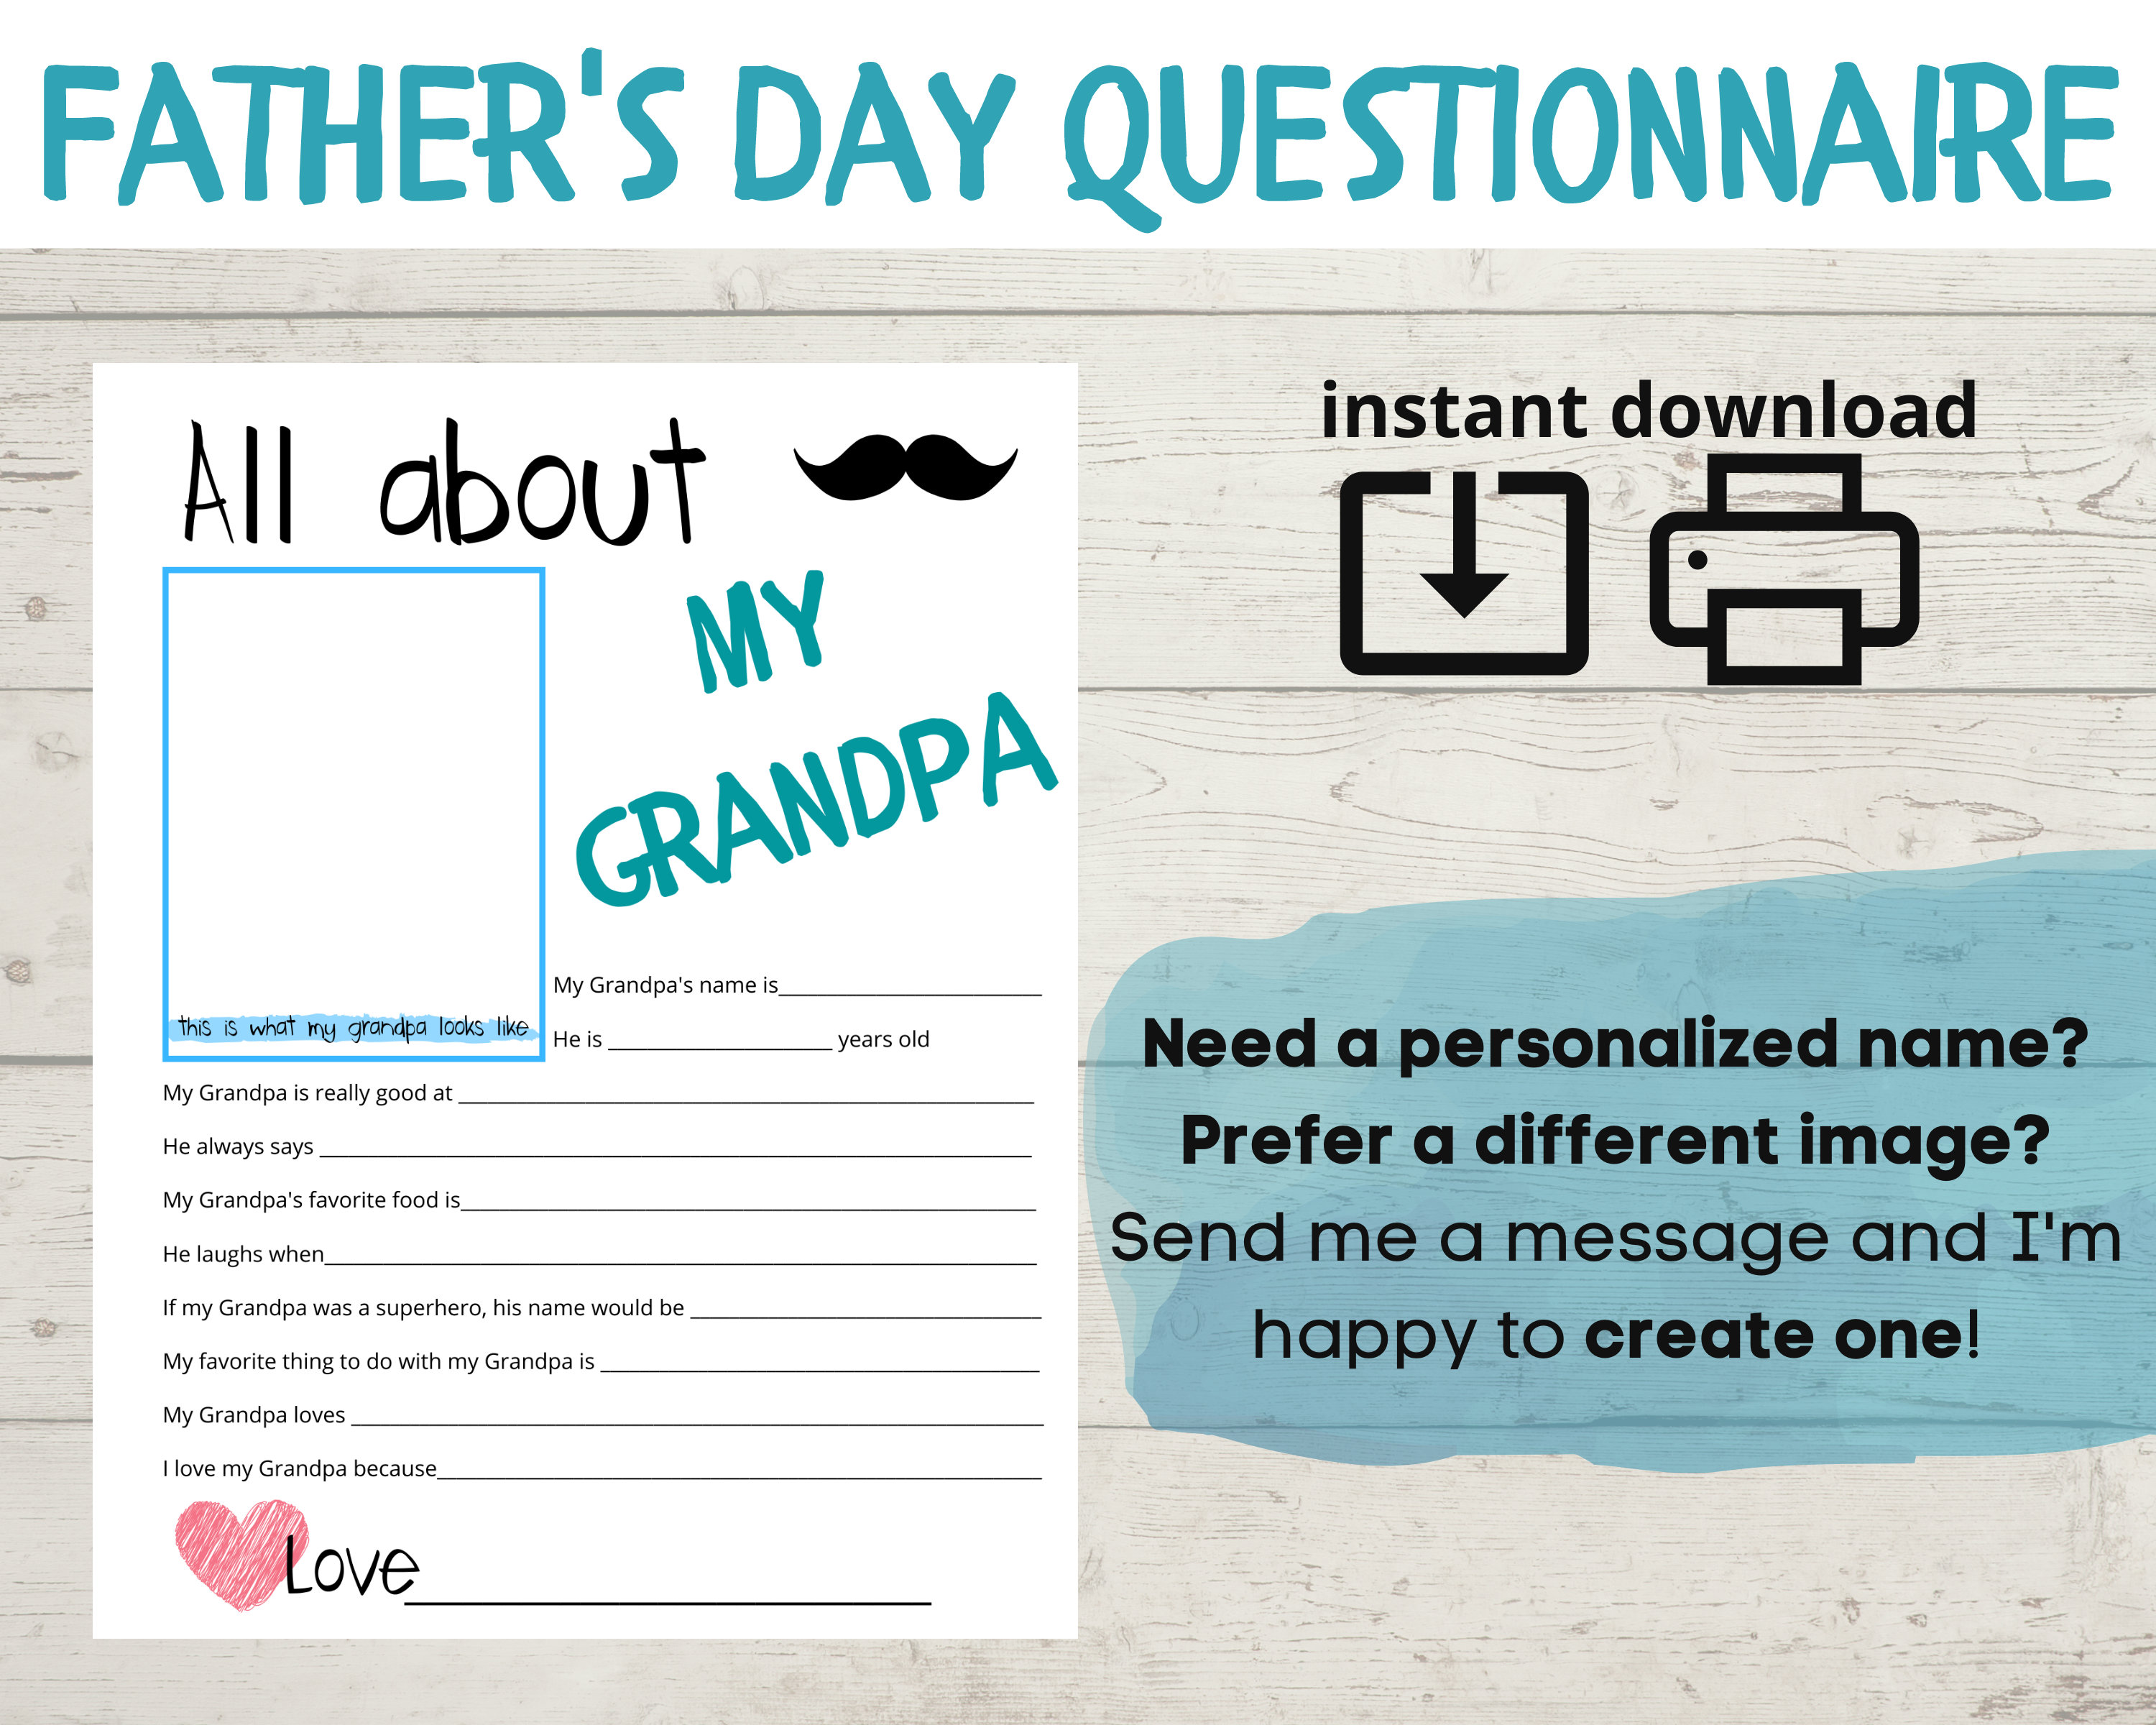 All About My Grandpa Fathers Day Questionnaire photo